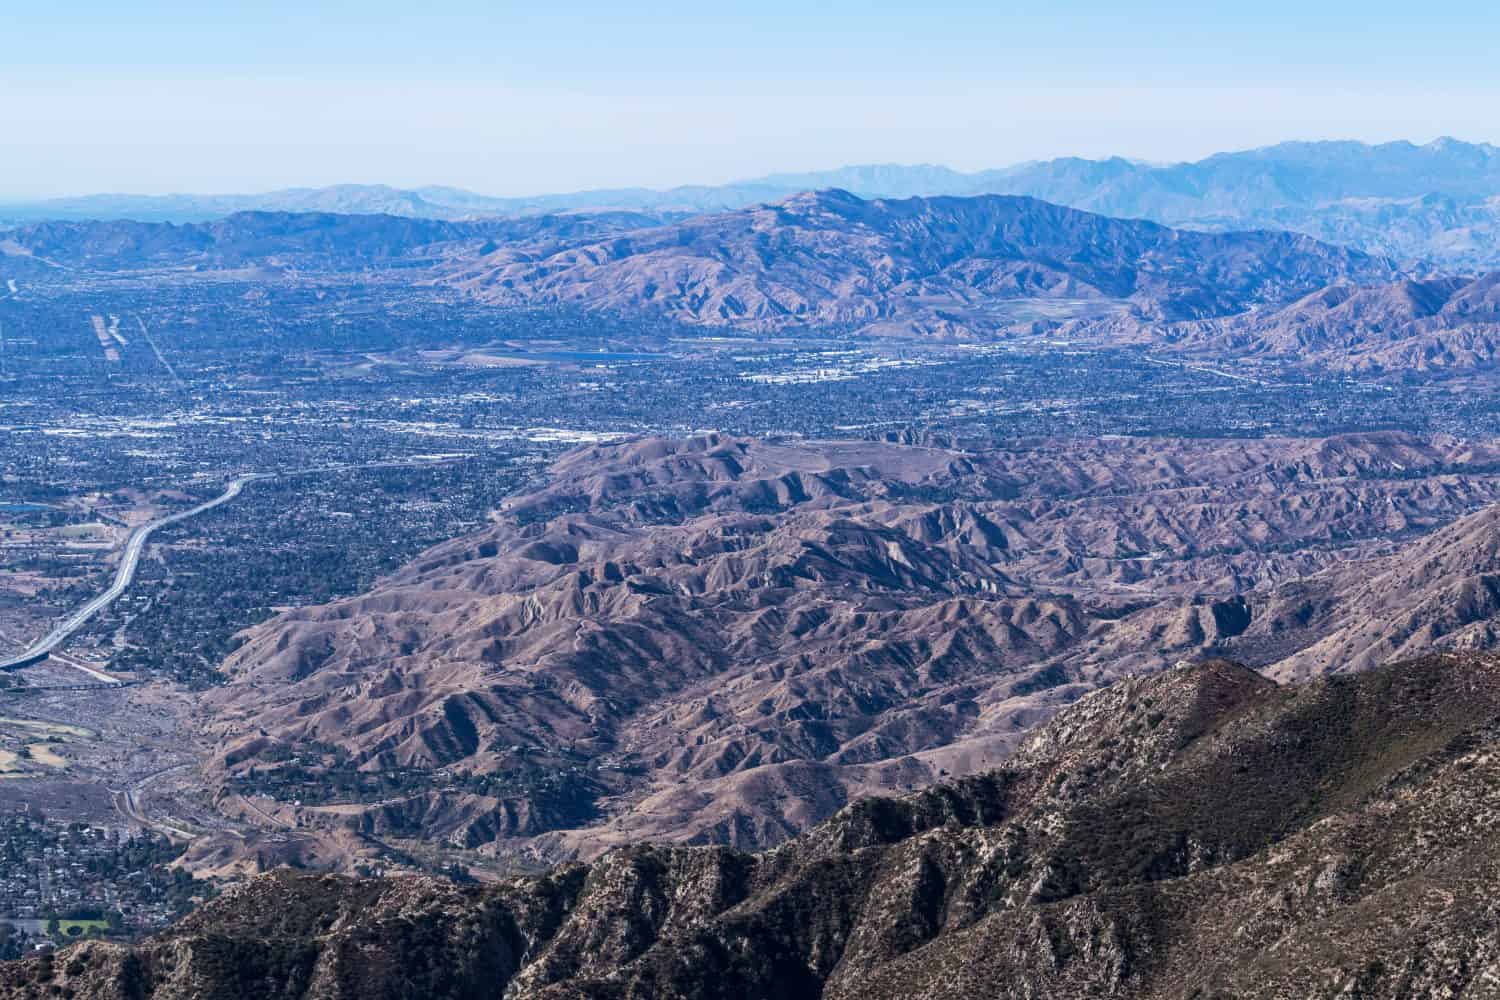 Aerial view towards Sylmar and Pacoima in the San Fernando Valley area of Los Angeles California.  